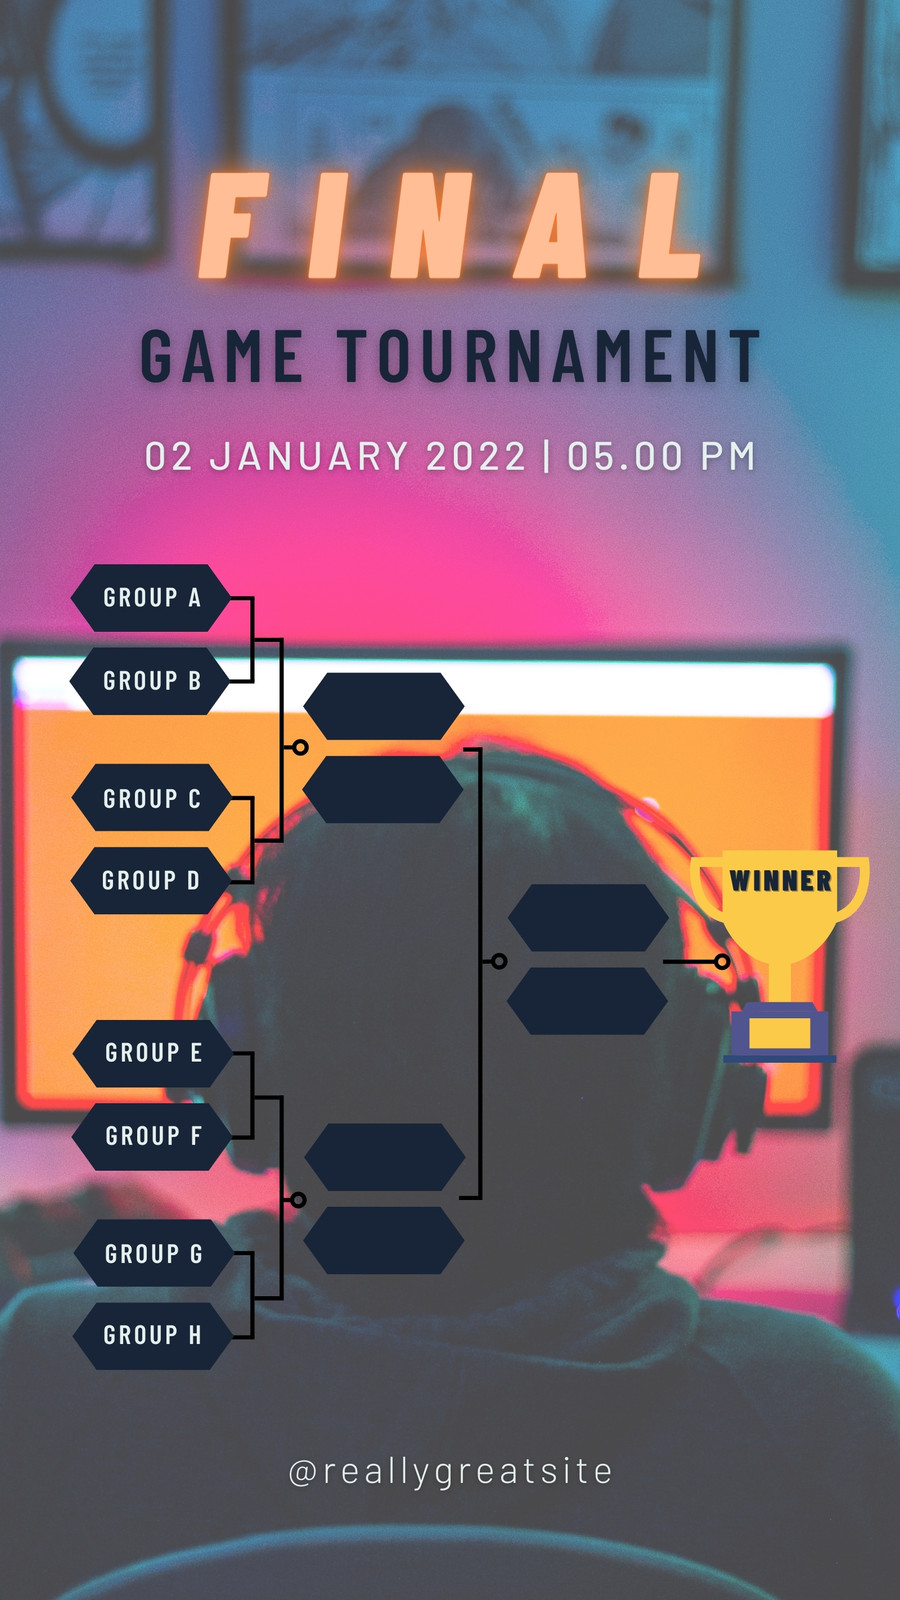 Customize 5,277+ Gaming  Banner Templates Online - Canva